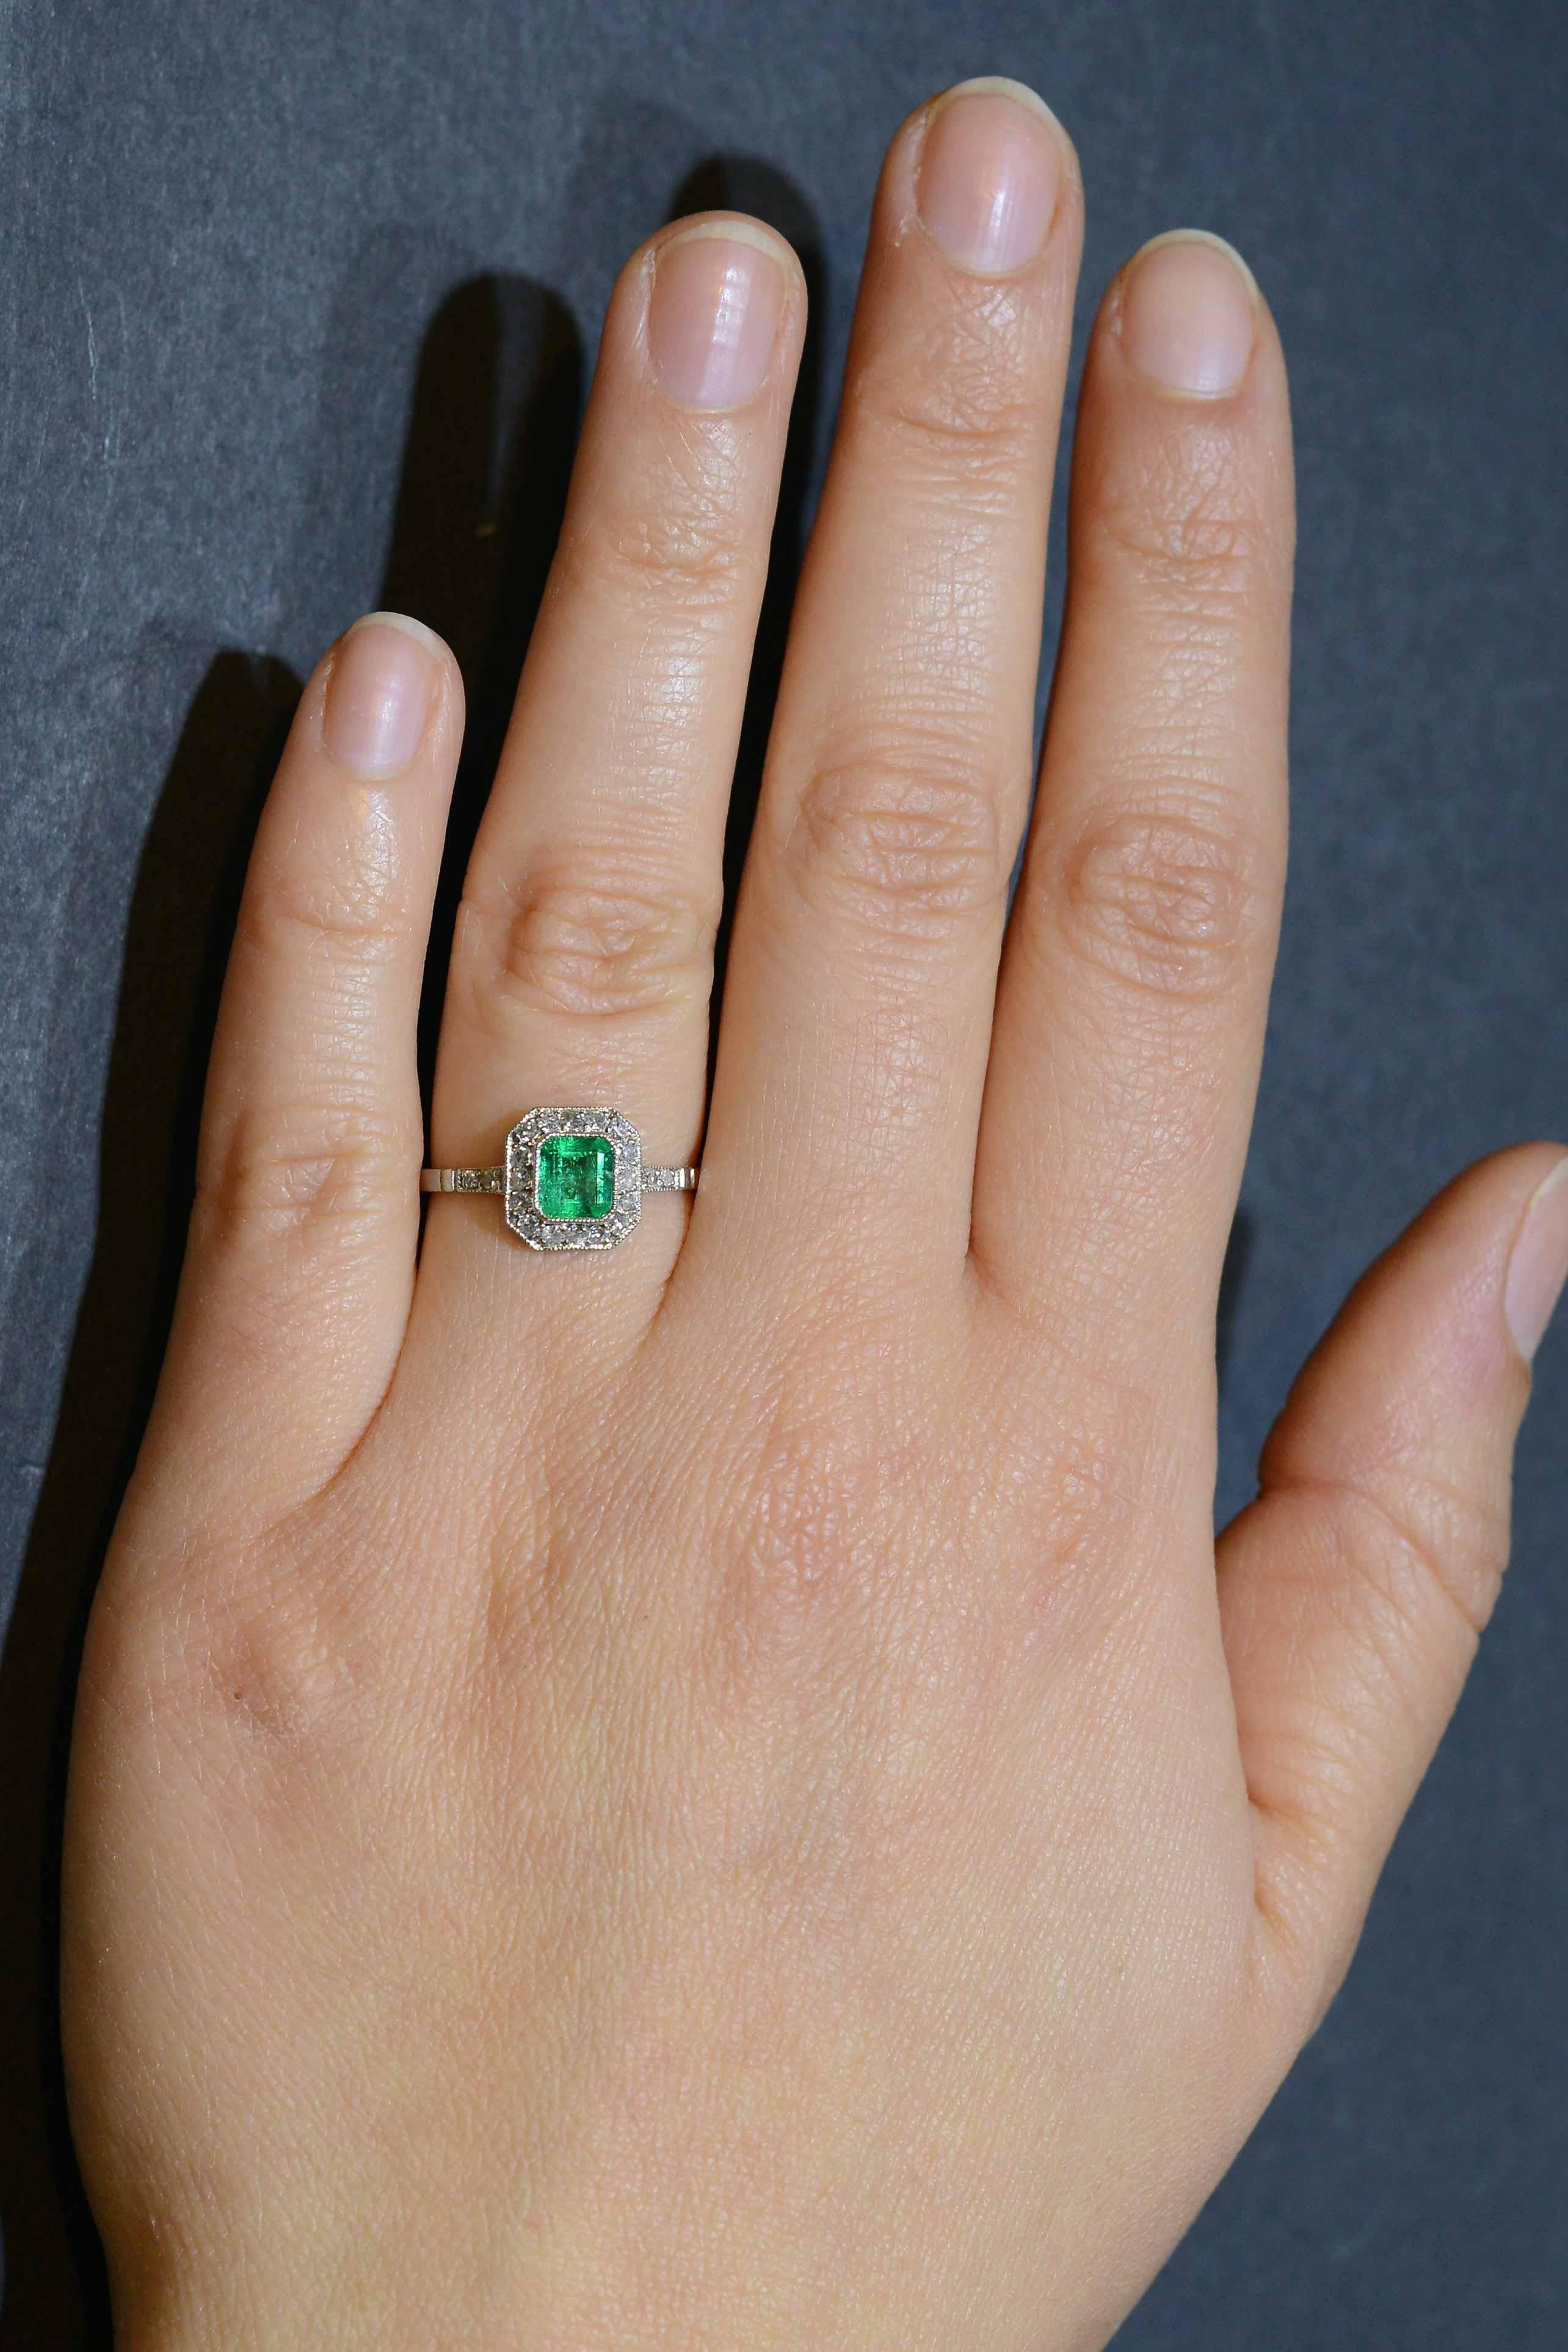 A breathtaking grass-green emerald takes center stage in this striking Art Deco style engagement ring. The platinum setting features a gemstone that glows with a light from within its soul. Floating in a bezel setting and surrounded with a dainty